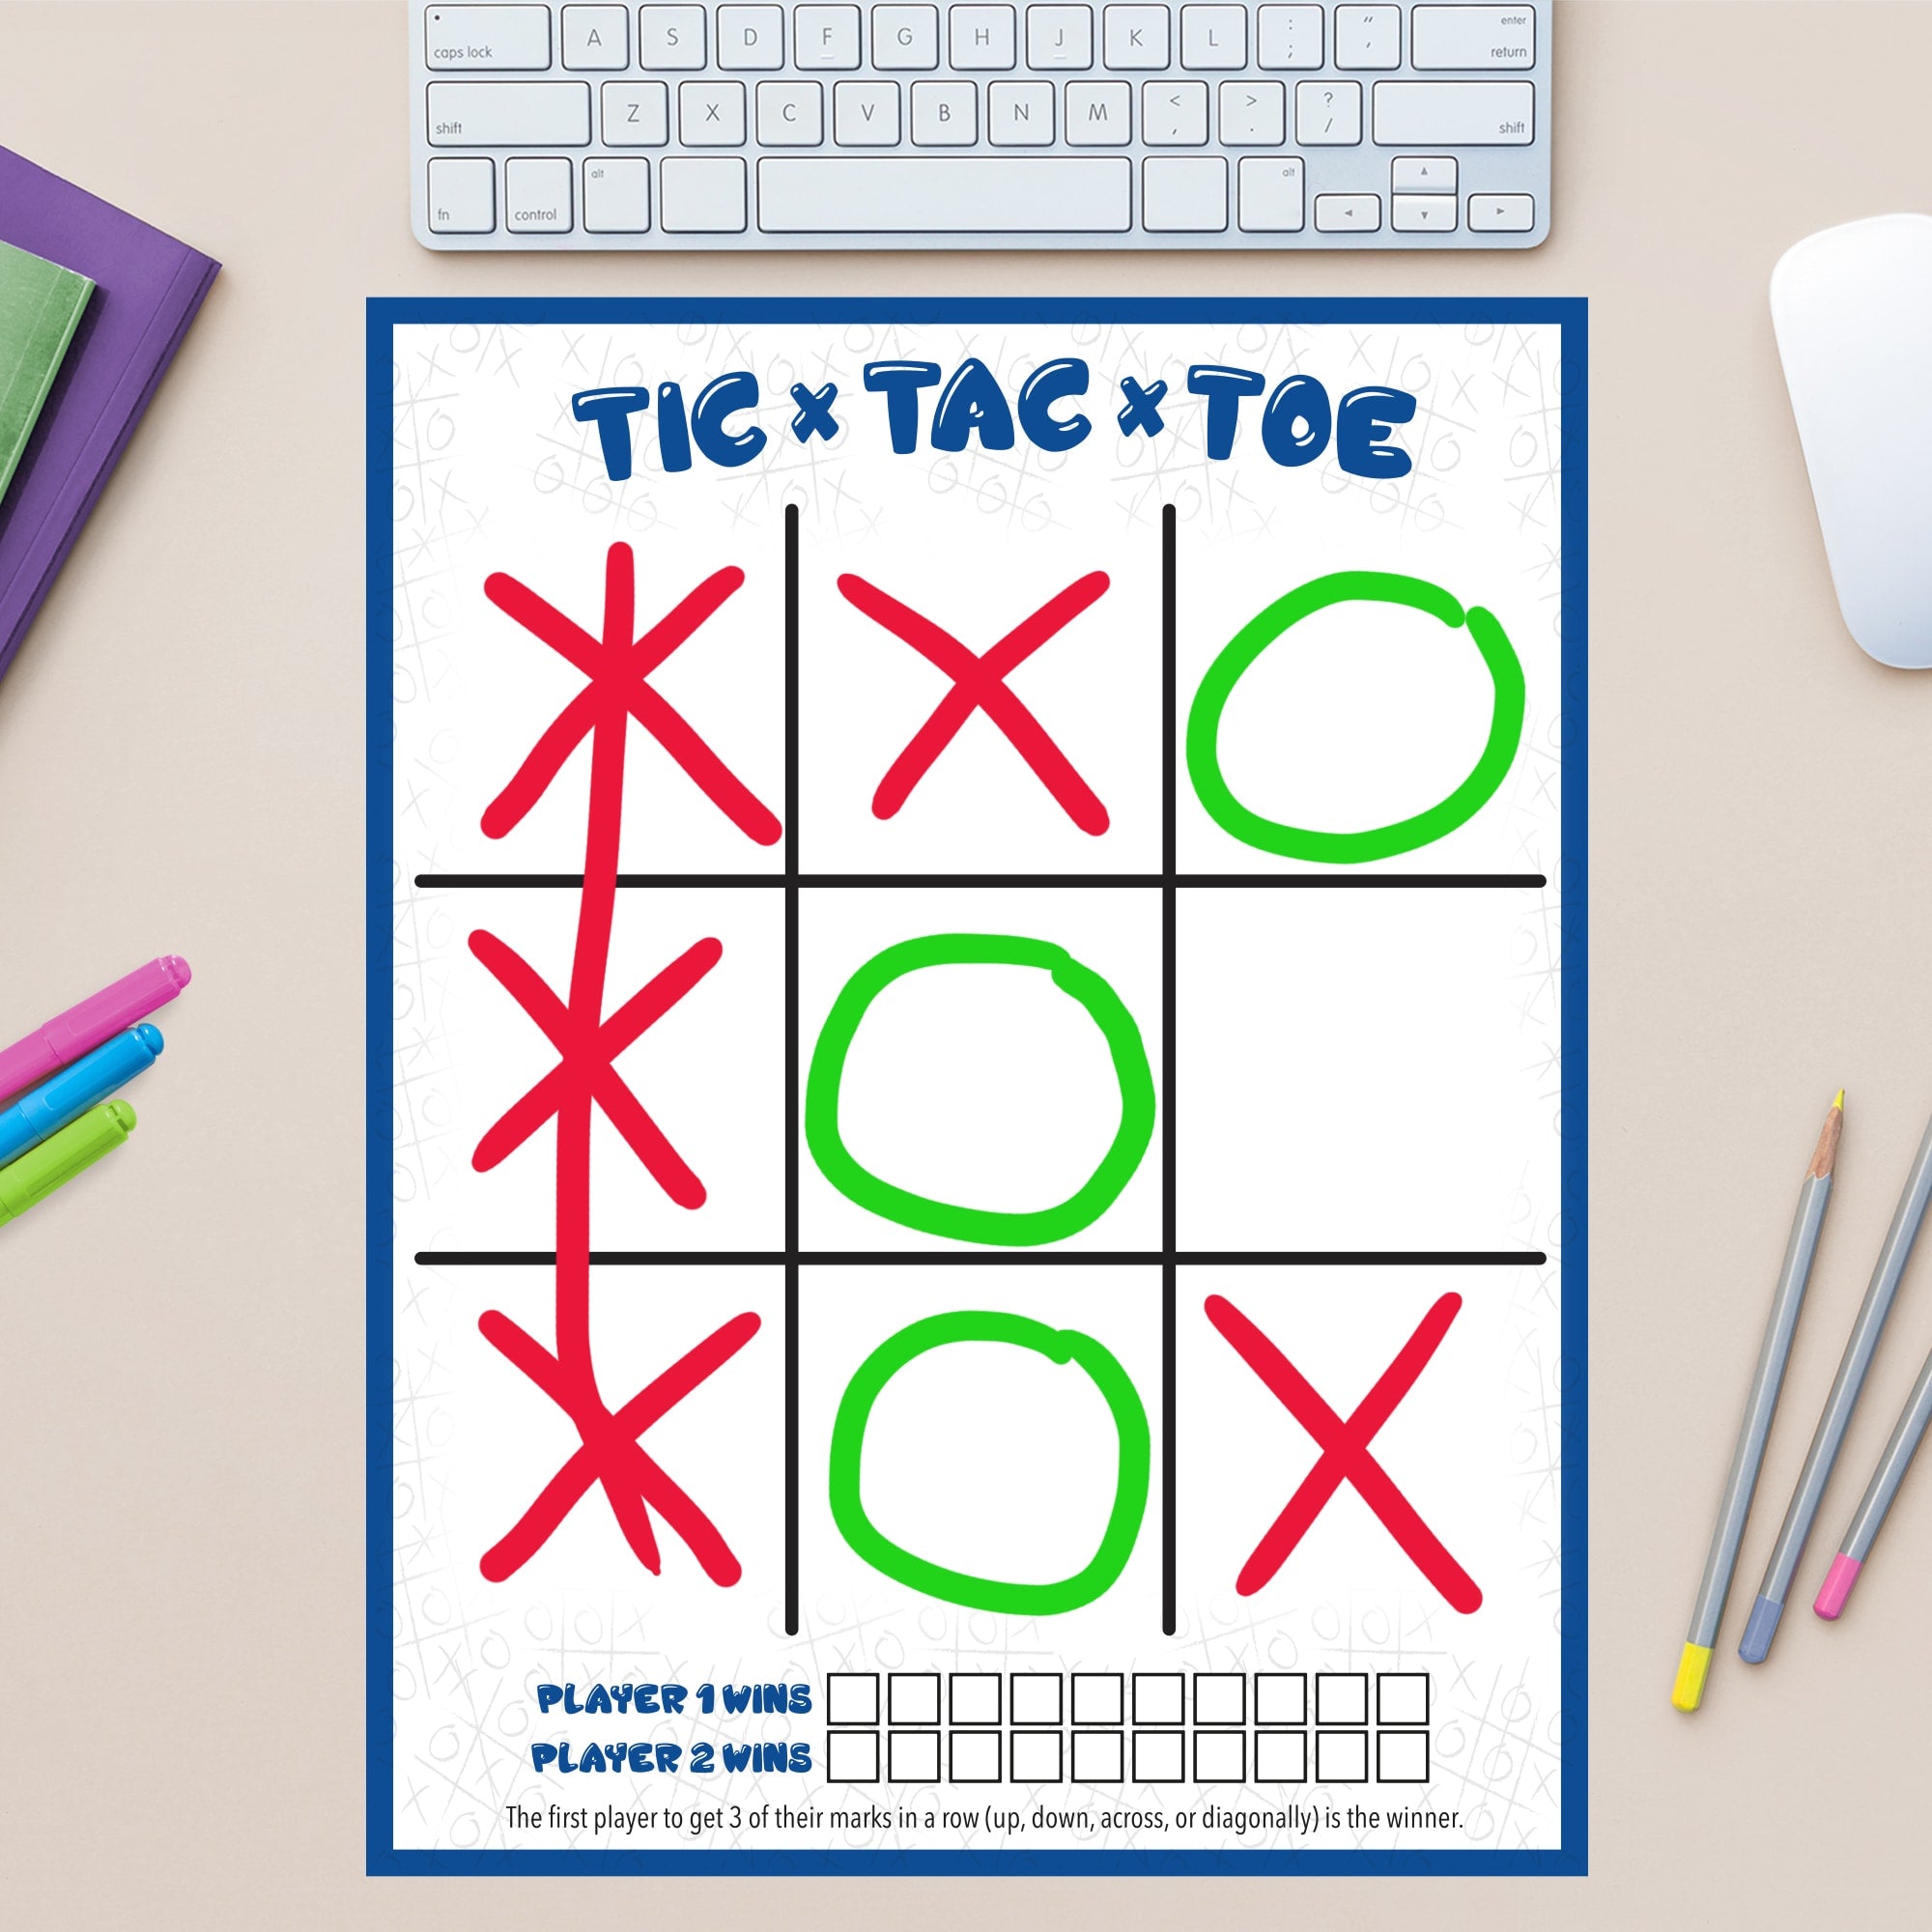 Tic-Tac-Toe Game - Removable Dry Erase Vinyl Decal 11.5"W x 11.5"H by Fathead